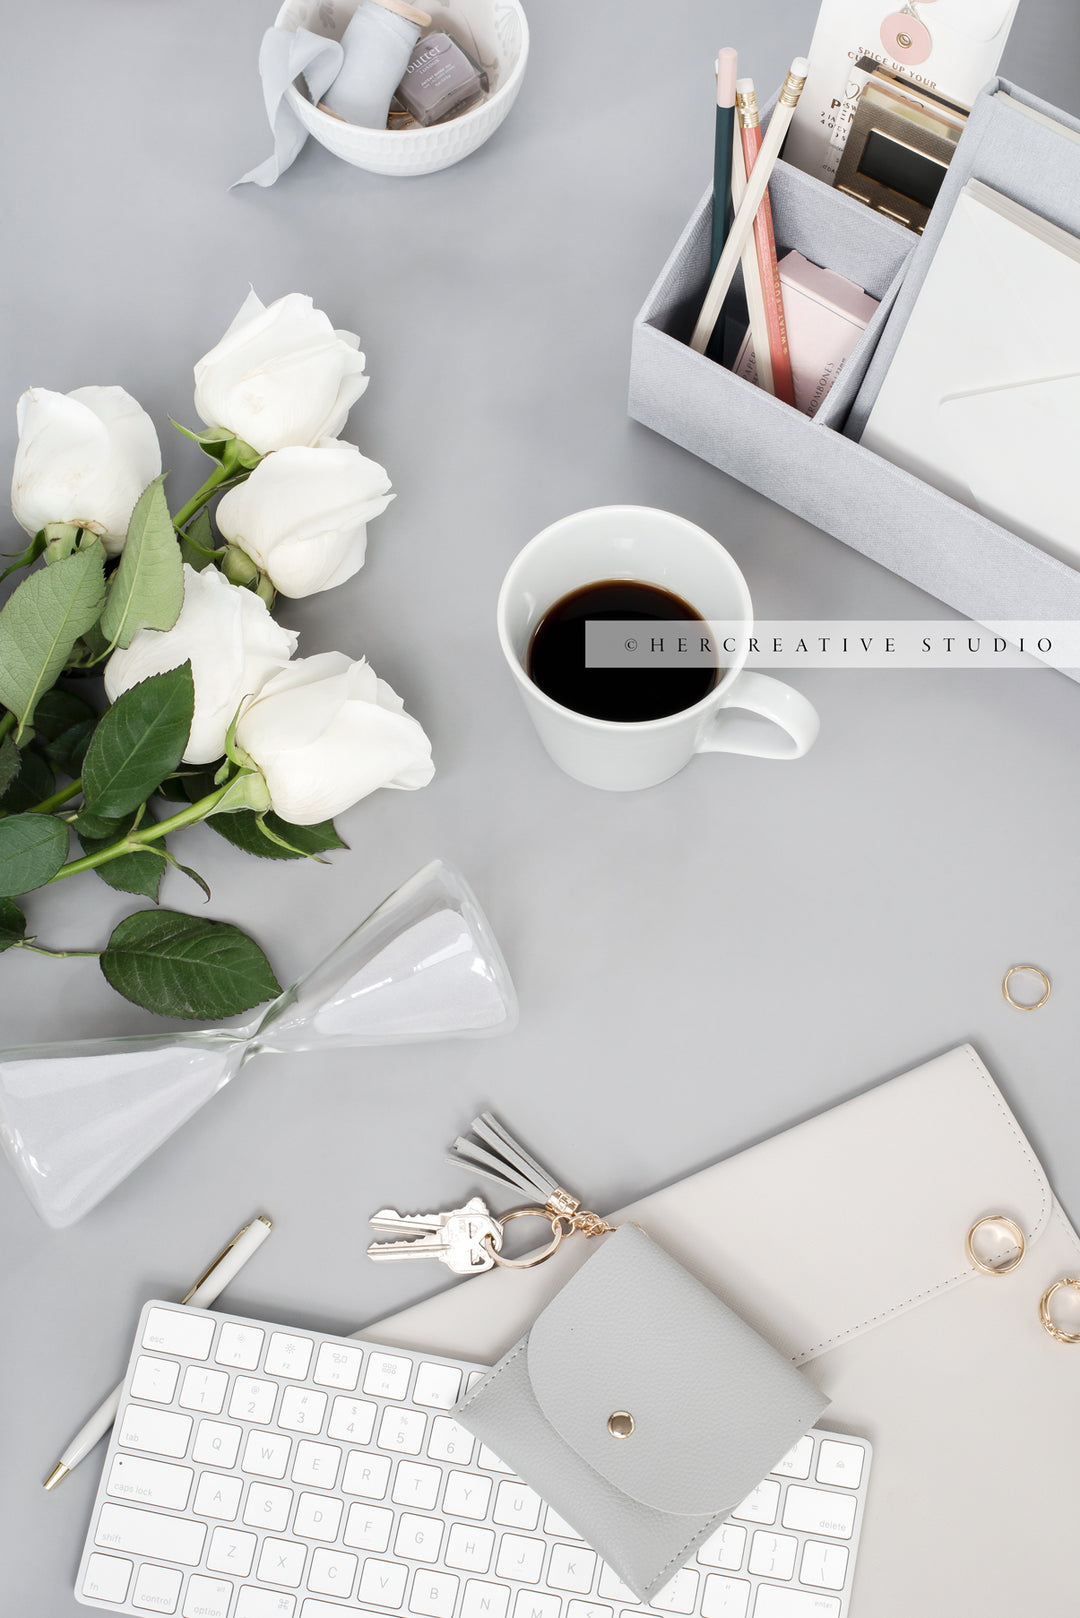 Roses, Hourglass & Keychain on Grey Background. Stock Image